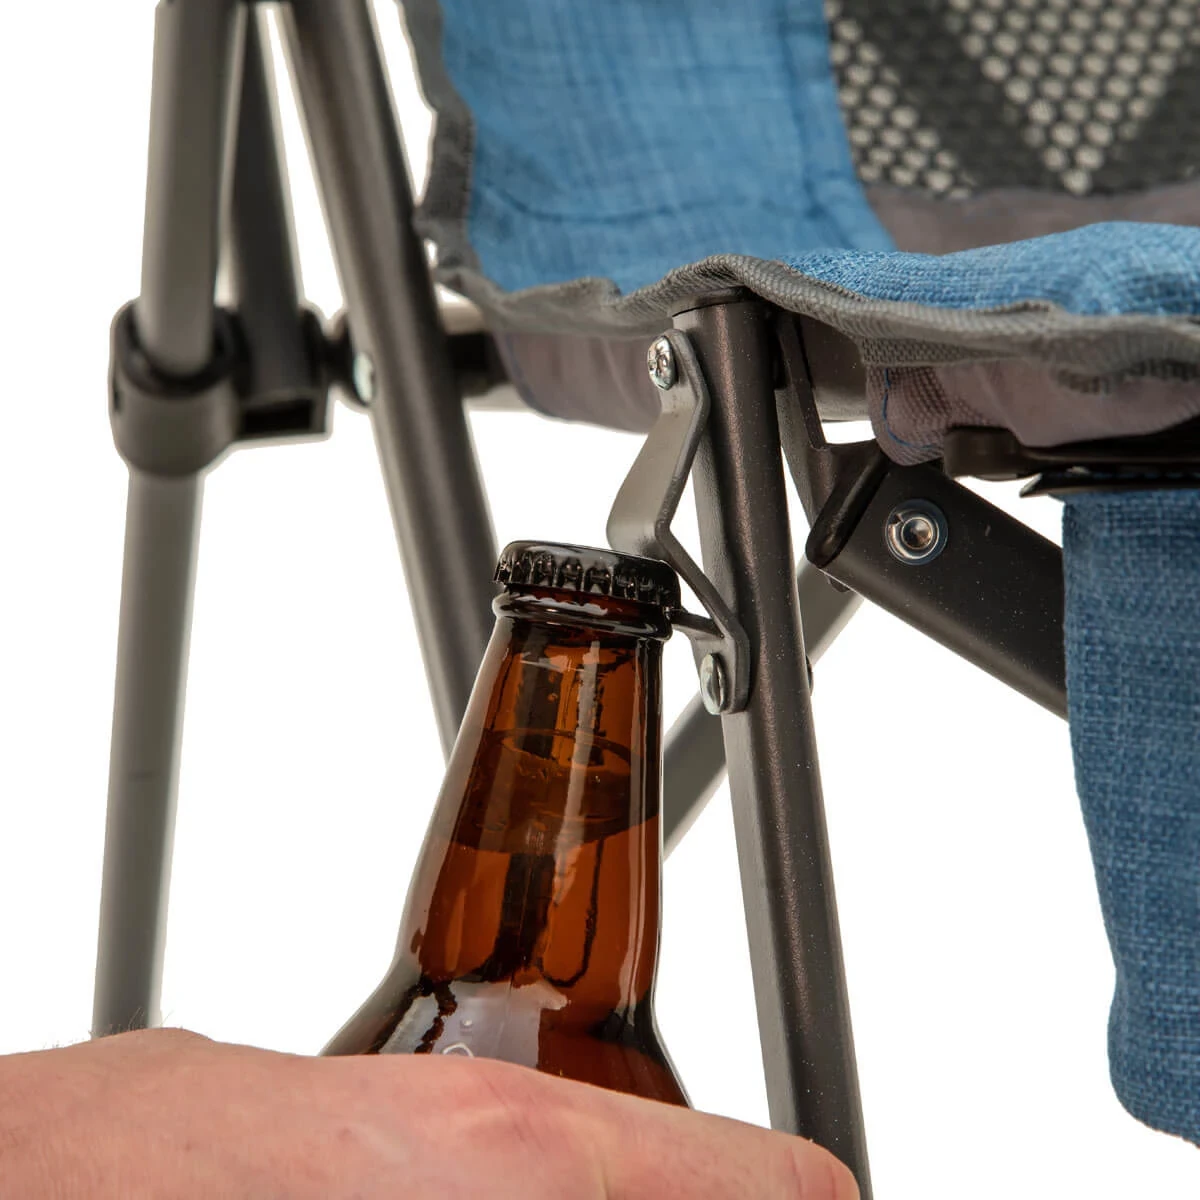 Close up image of the Camp Chair bottle opener